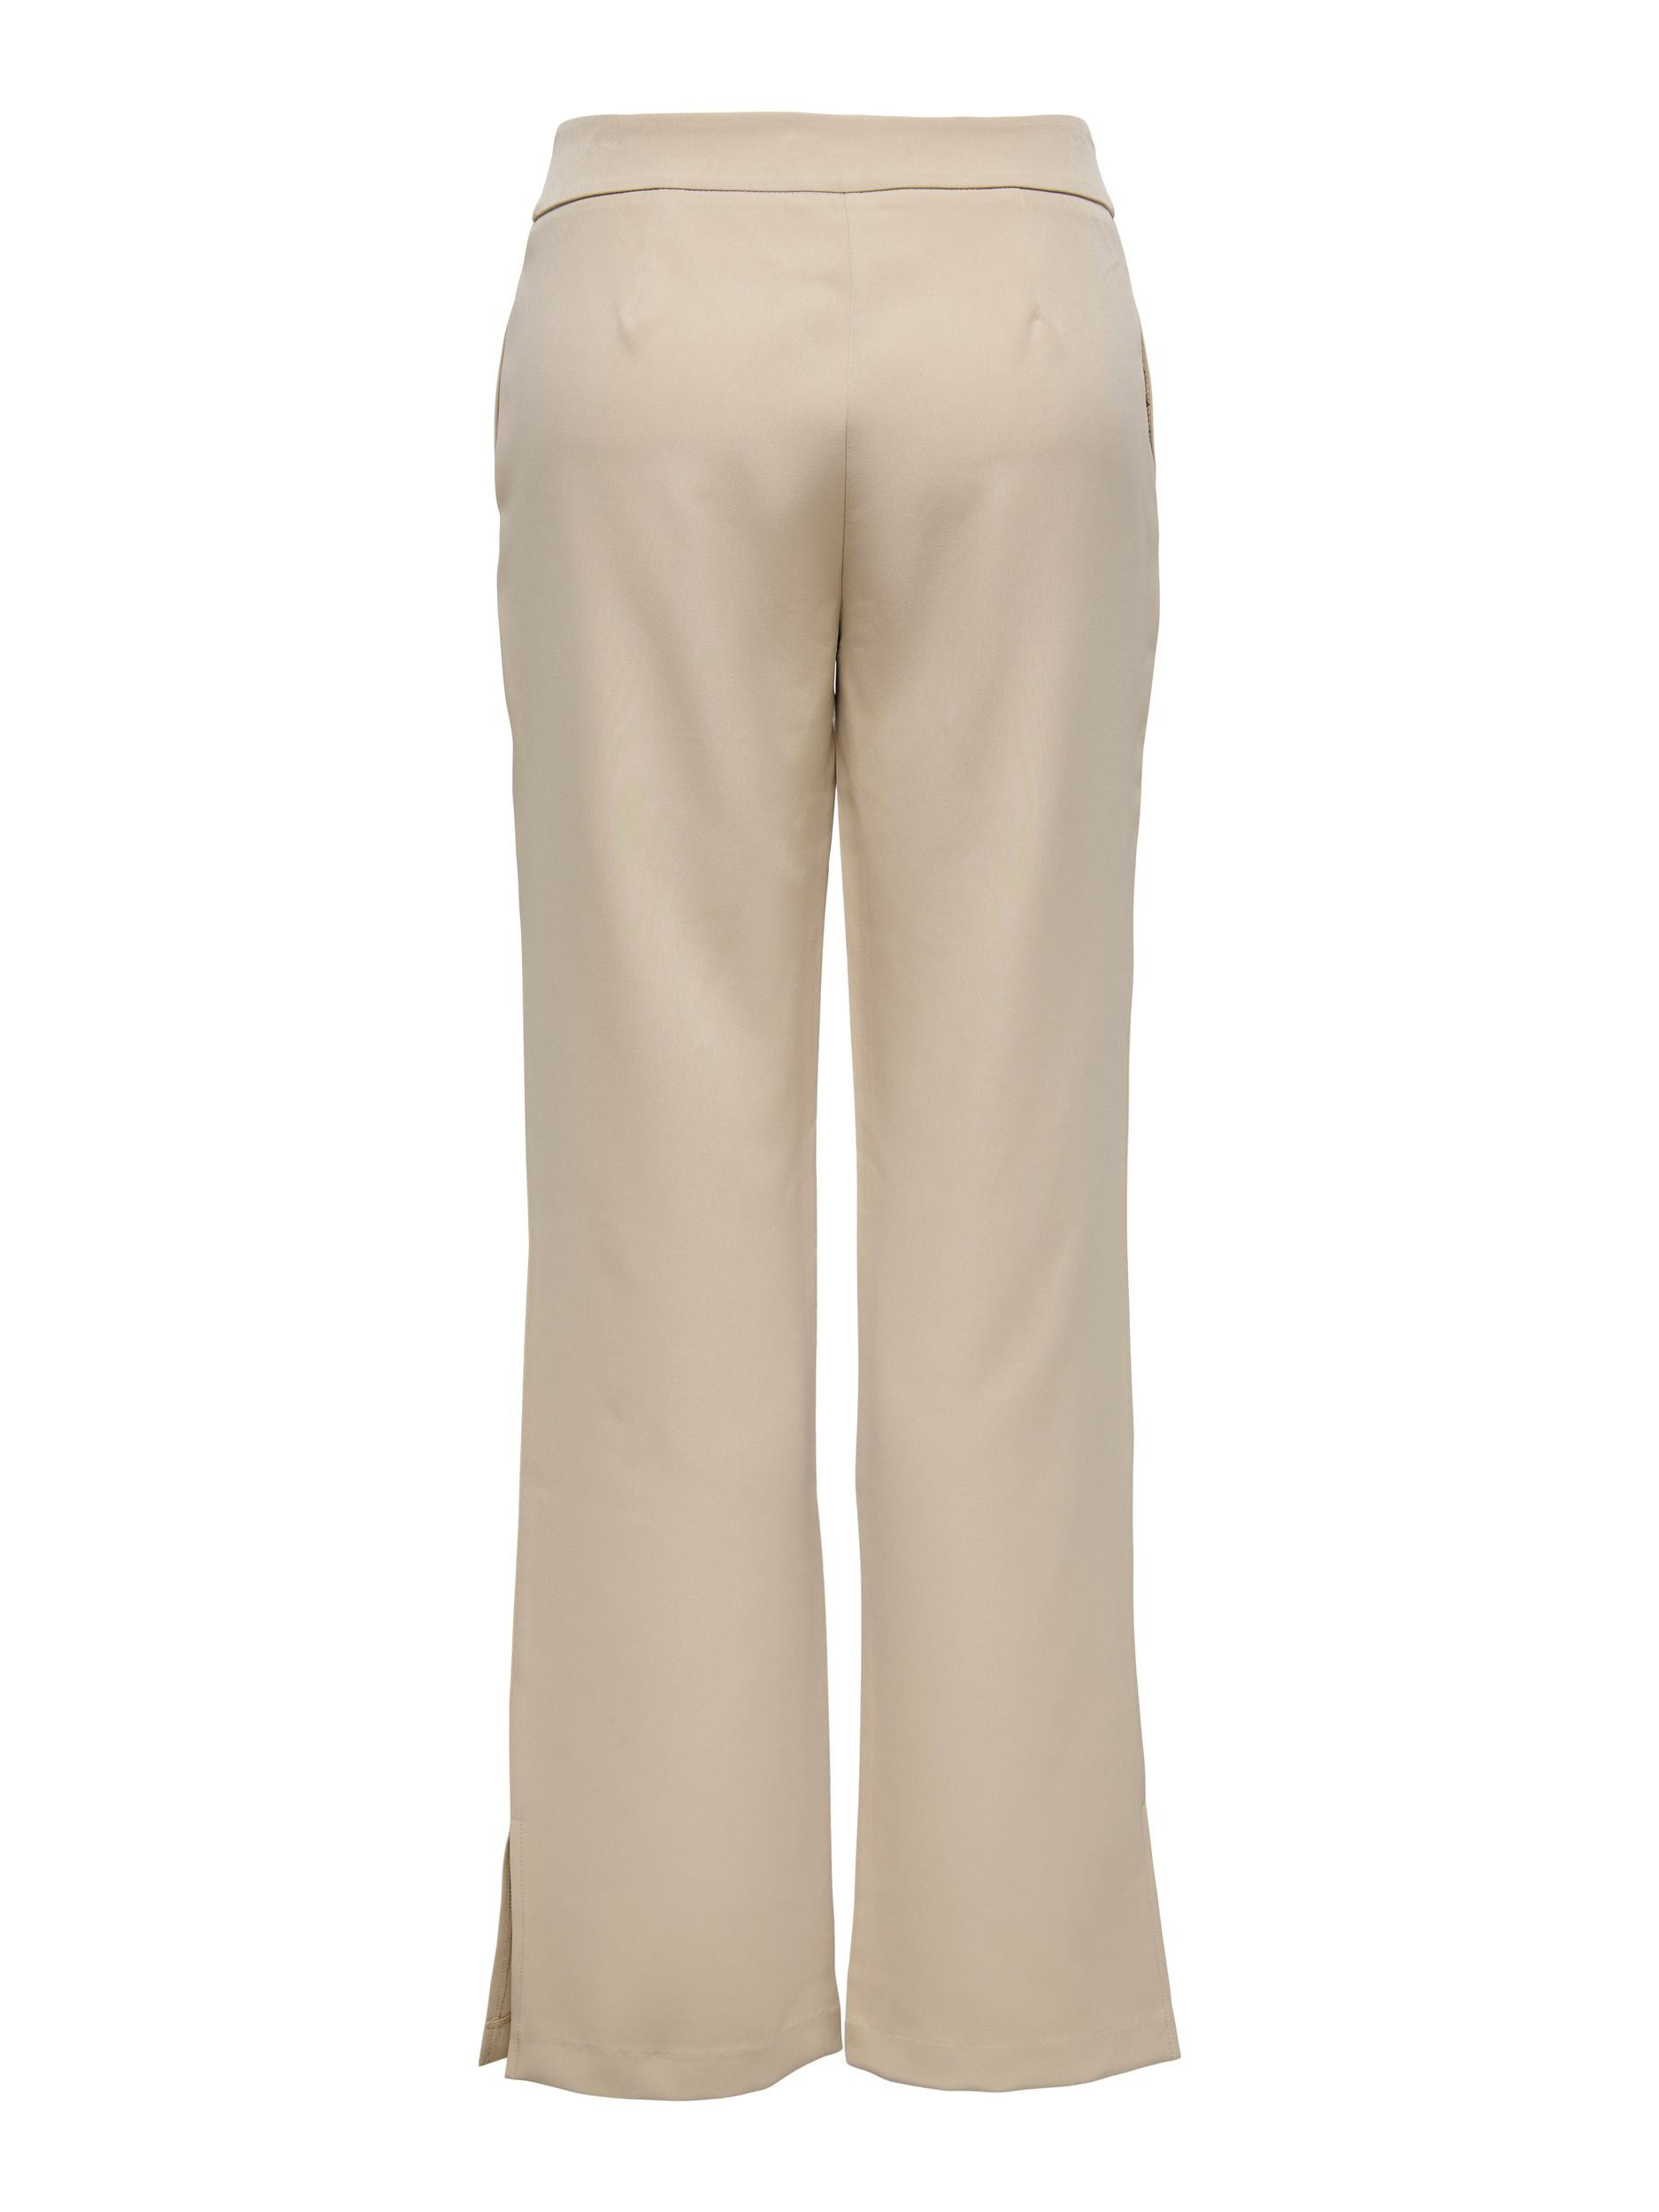 Only - Pantaloni straight fit, Beige chiaro, large image number 1